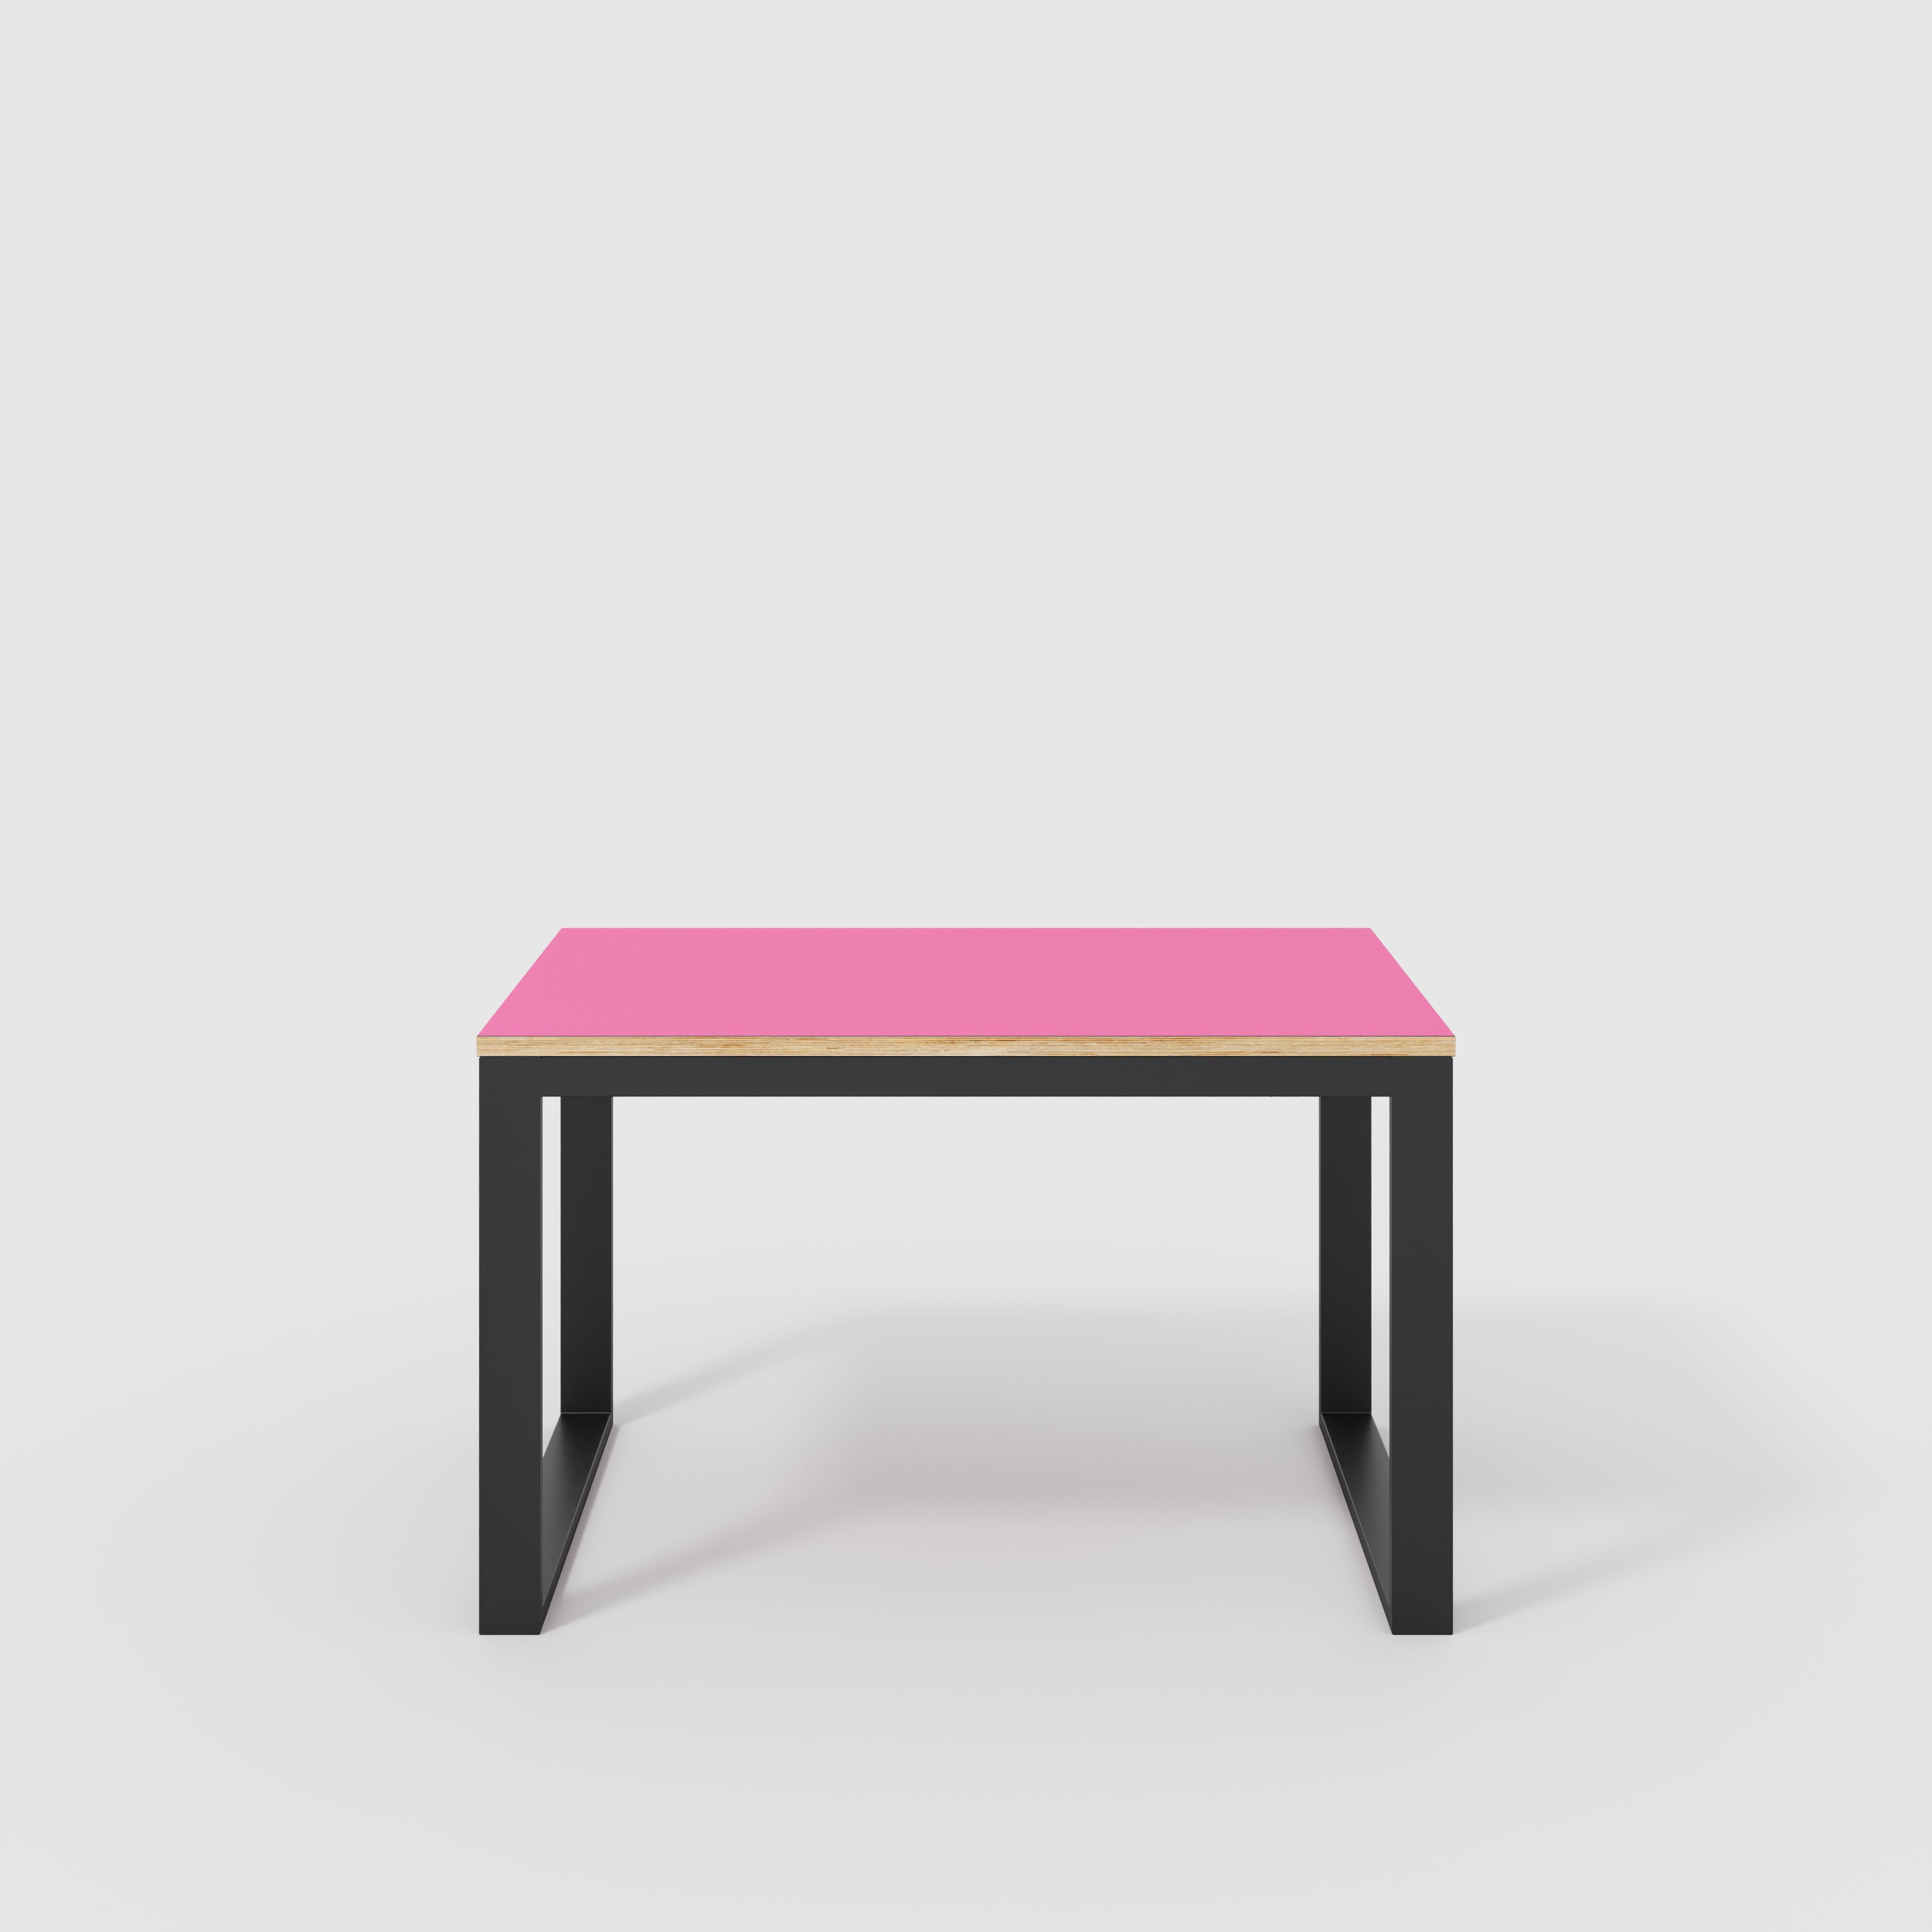 Table with Black Industrial Frame - Formica Juicy Pink - 1200(w) x 745(d) x 735(h)